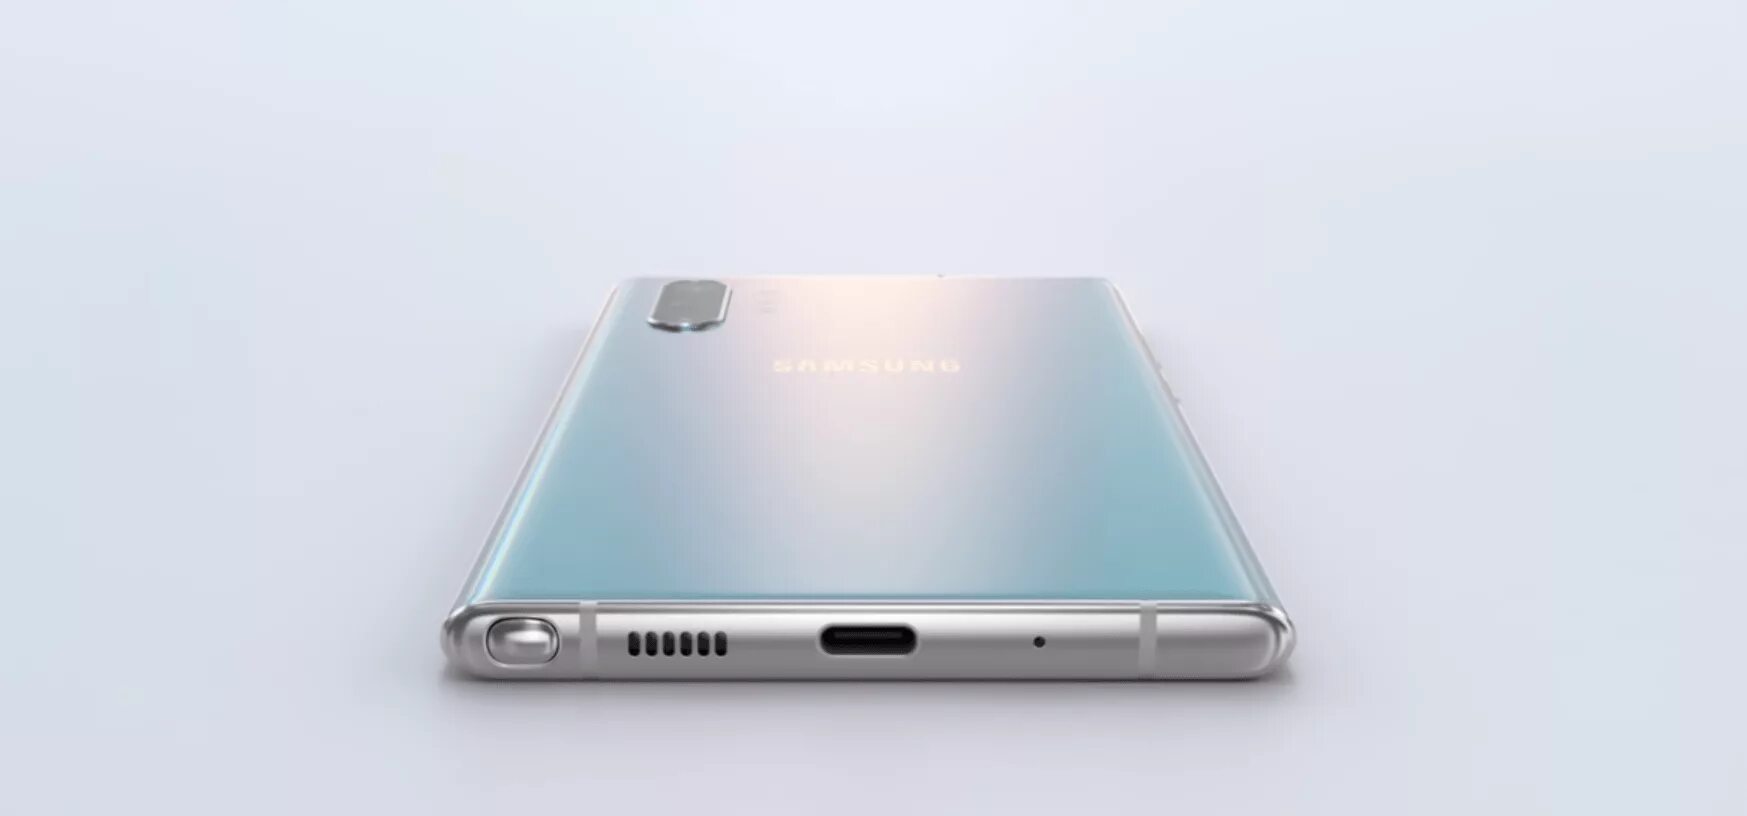 Самсунг ноут 11. Samsung Note 11. Samsung Note 11 Lite. Note 11 s Gray. Galaxy note 11